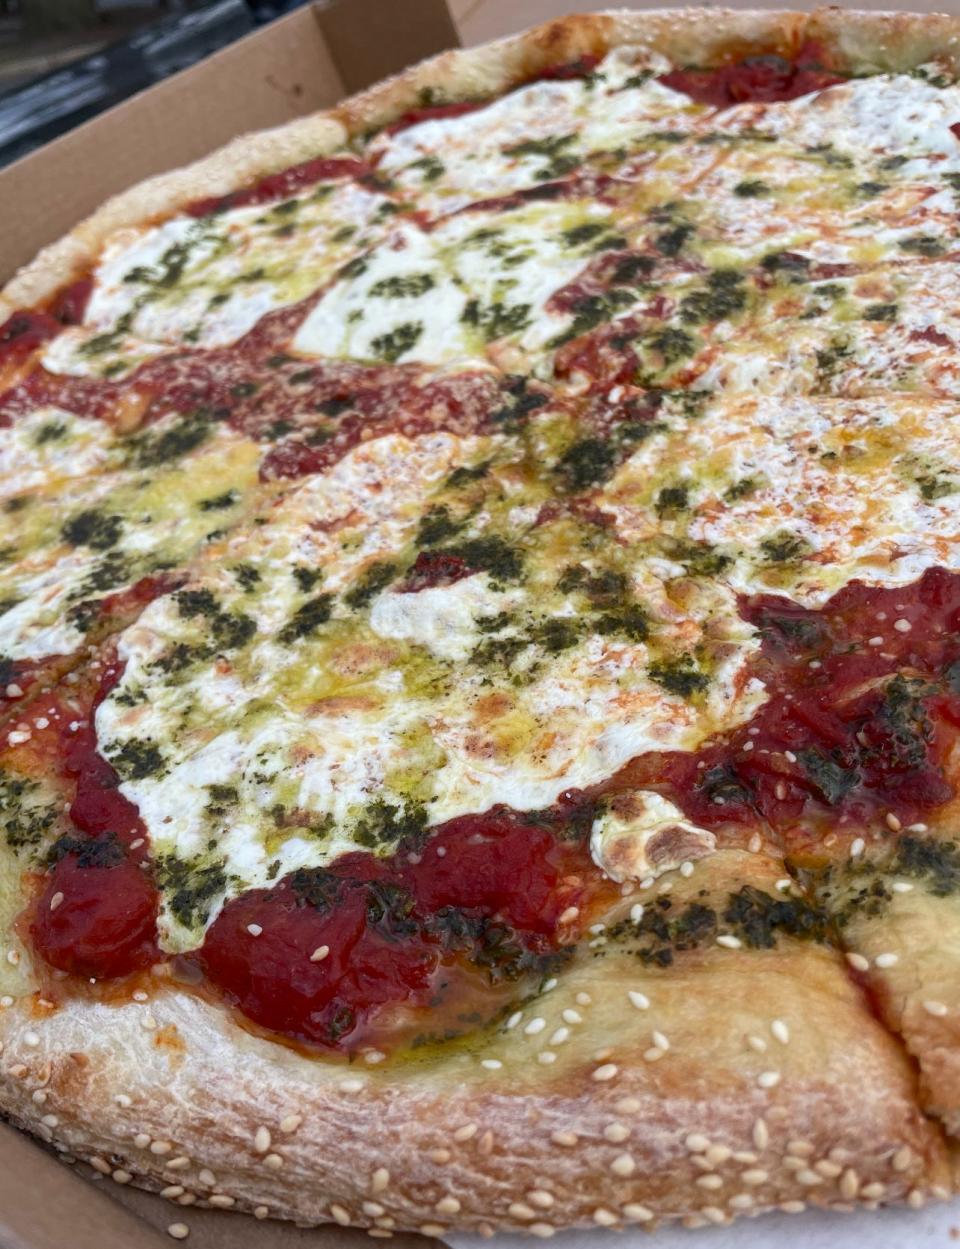 A signature sesame seed crust pizza with plum tomatoes, garlic, basil, fresh mozzarella and housemade pesto from Esposito's Pizza in Matawan and Manasquan.